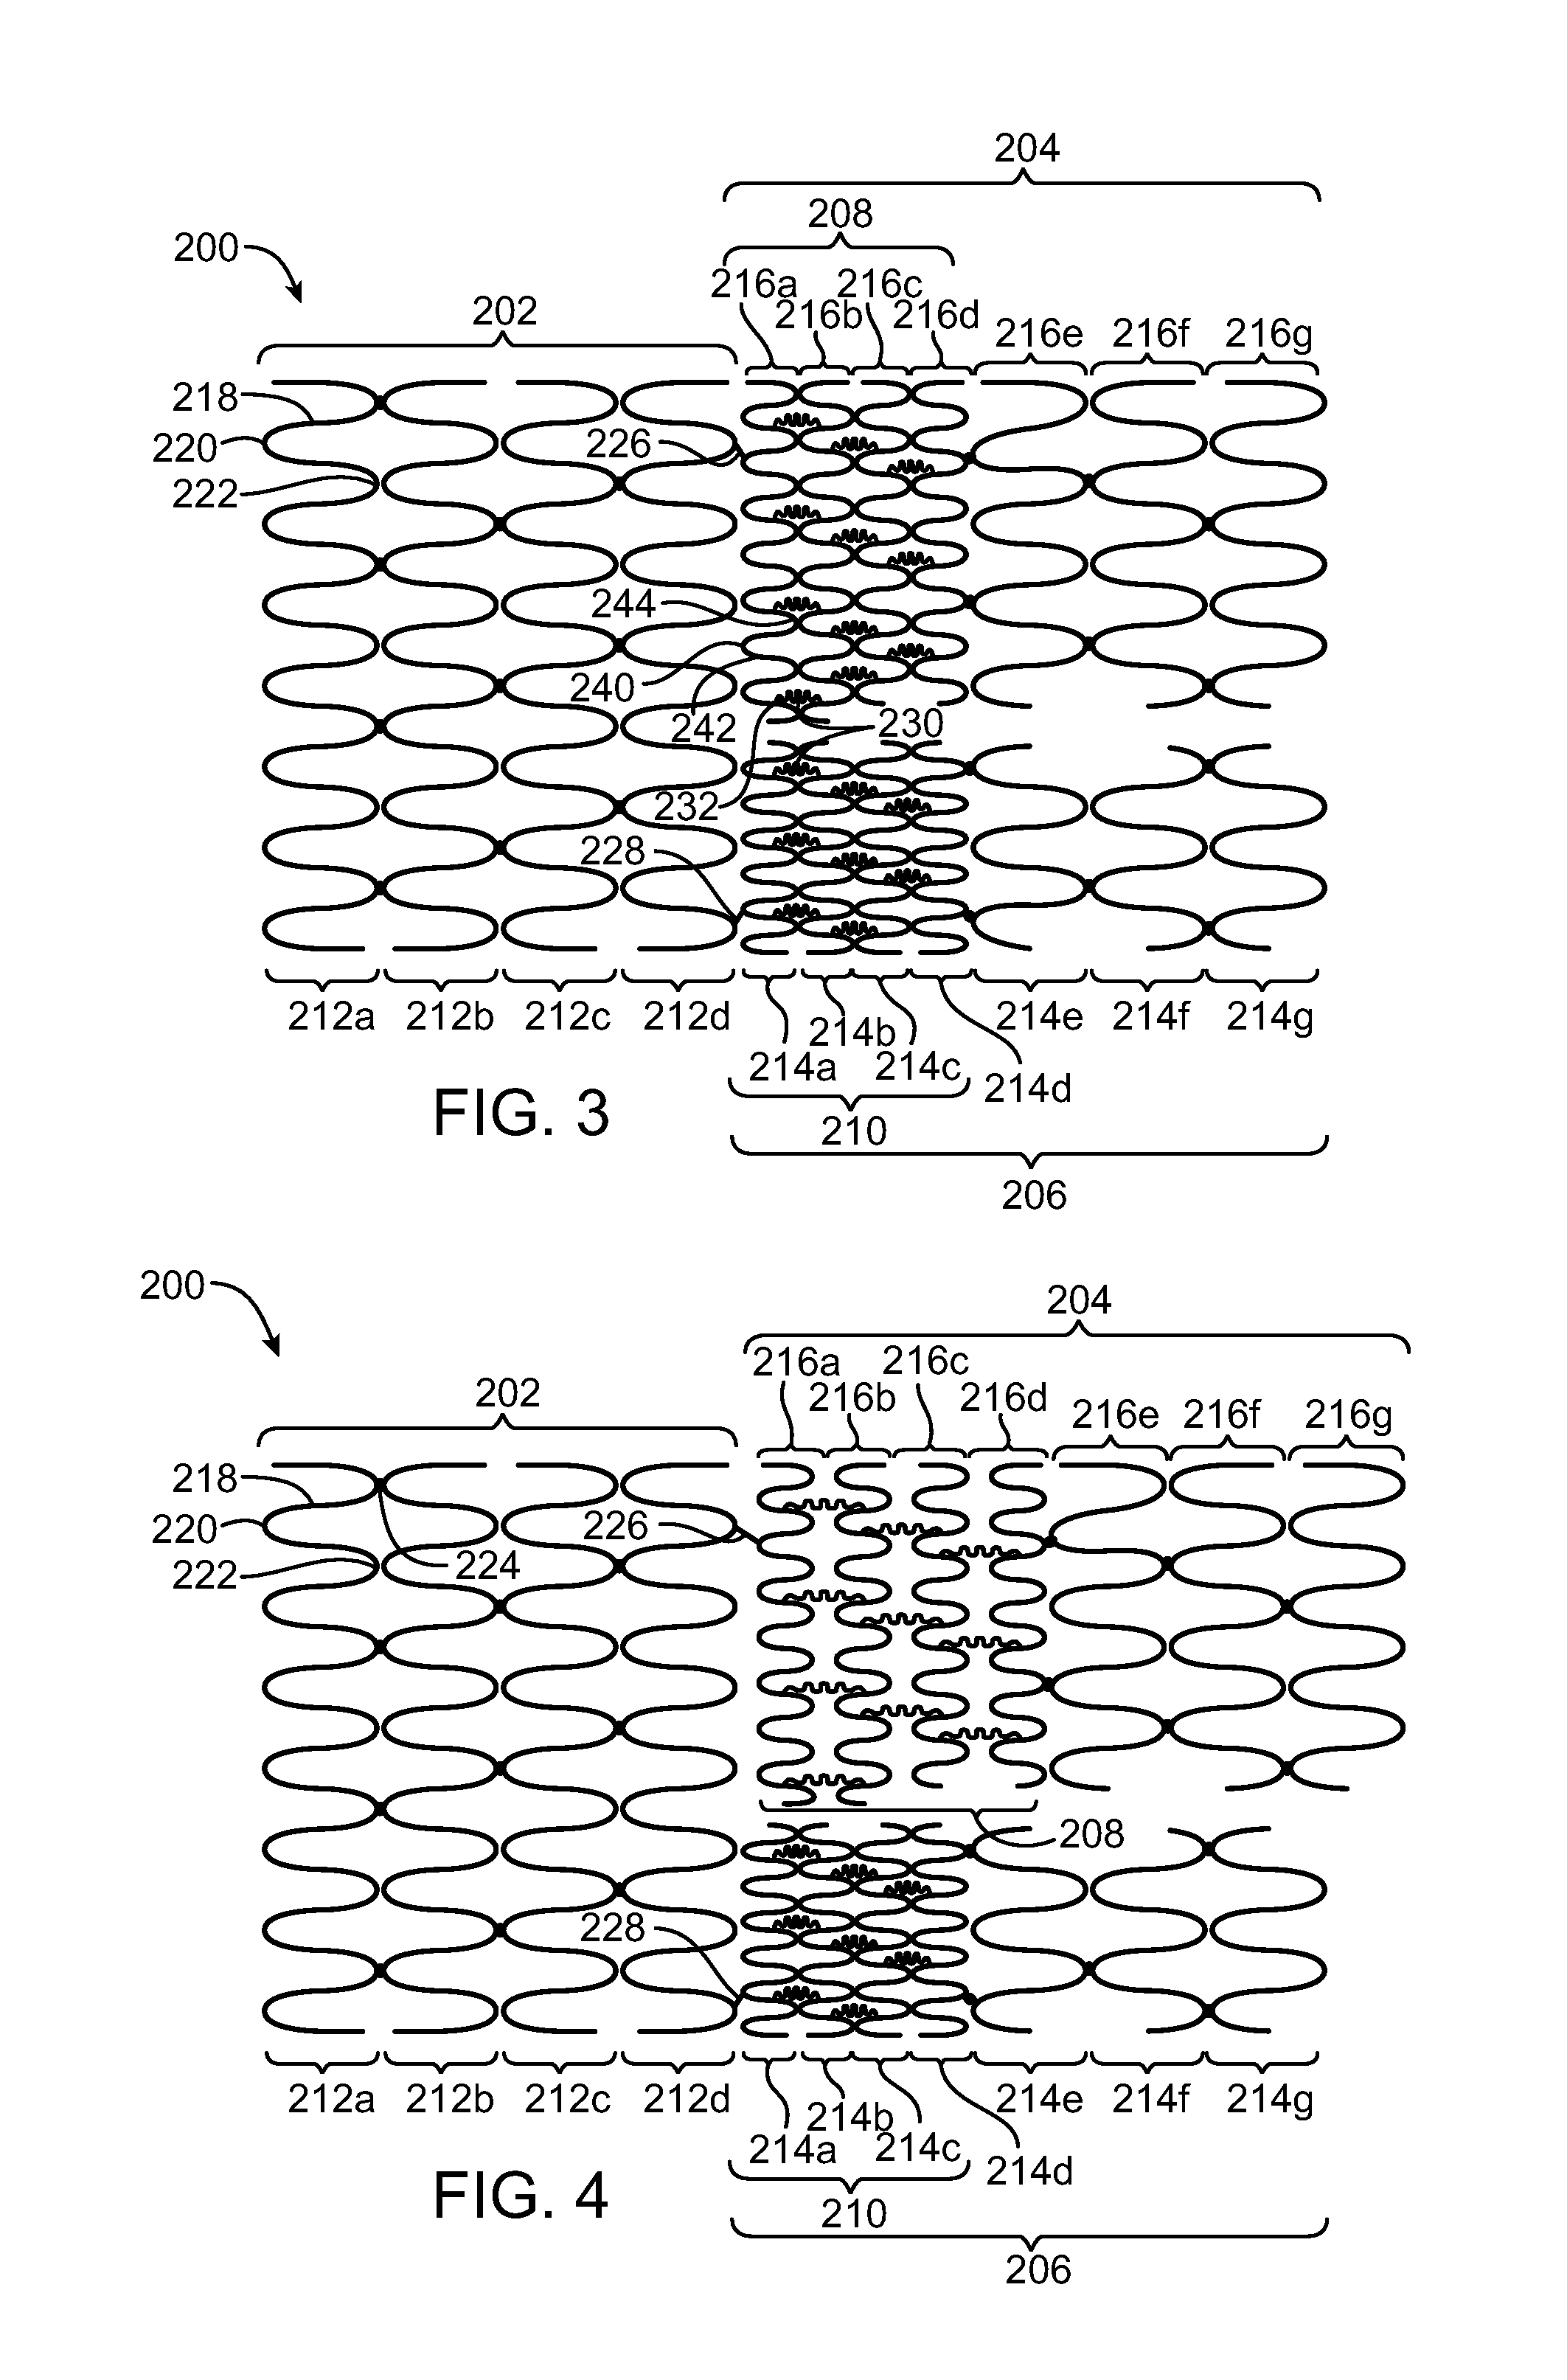 Bifurcated Stent with Variable Length Branches